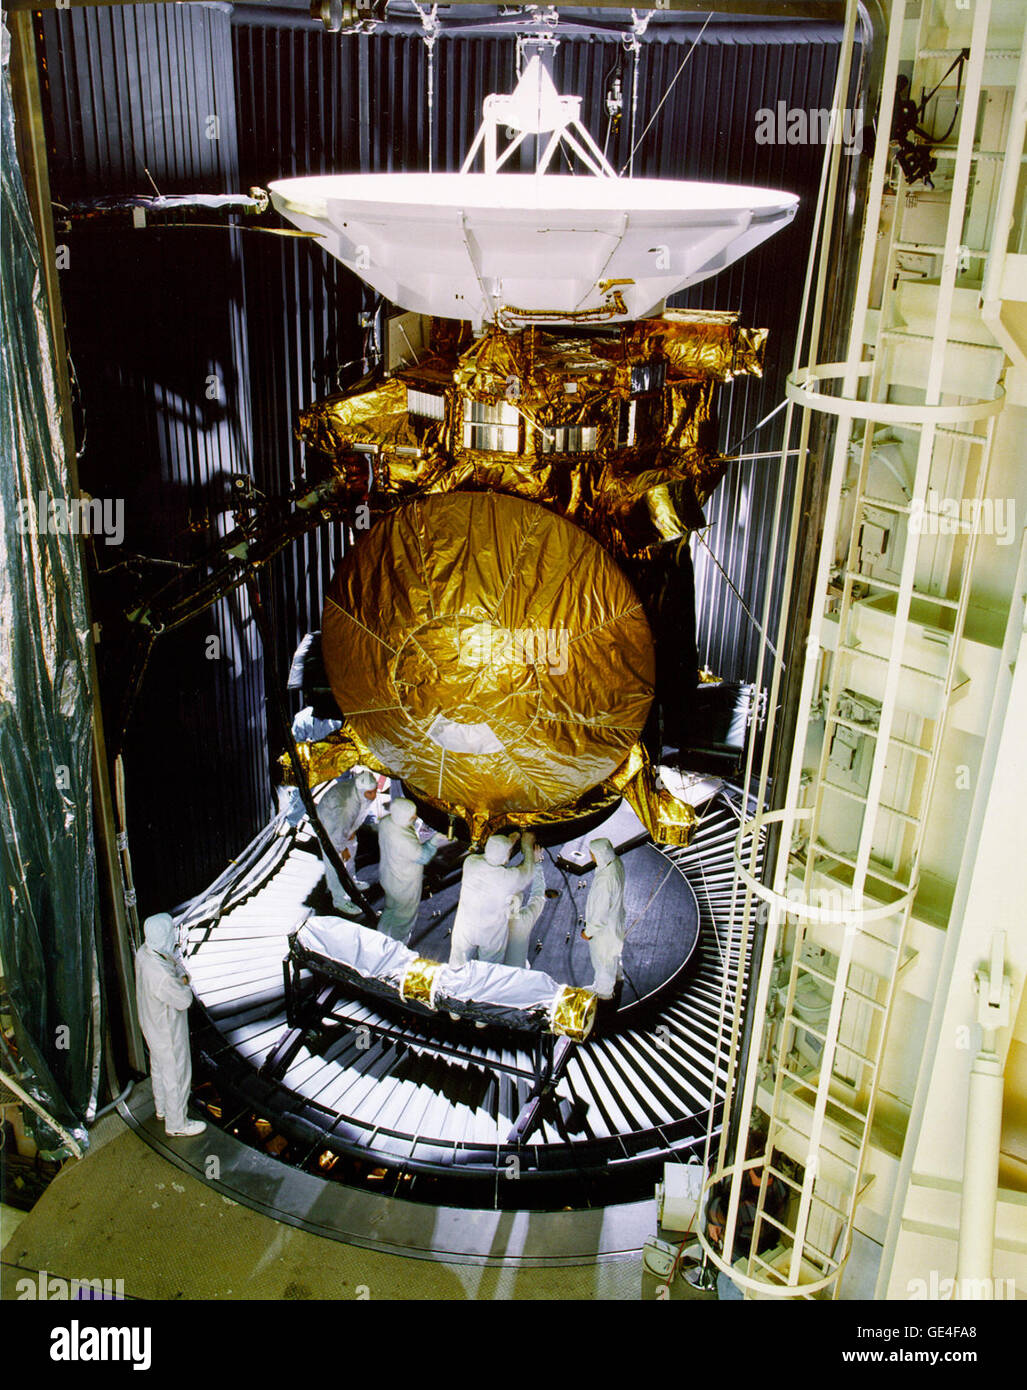 (October 31, 1996) The newly assembled Cassini Saturn probe undergoes vibration and thermal testing at the JPL facilities in Pasadena, California. Subjected to weeks of &quot;shake and bake&quot; tests that imitate the forces and extreme temperatures the spacecraft will experience during launch and spaceflight. Cassini's mission is to orbit Saturn for four years and study the planet, its rings and moons in detail. The large moon Titan is a principal target for exploration, and Cassini will carry the Huygens probe, (gold-mylar circular object seen here mounted on the front of the spacecraft) to Stock Photo